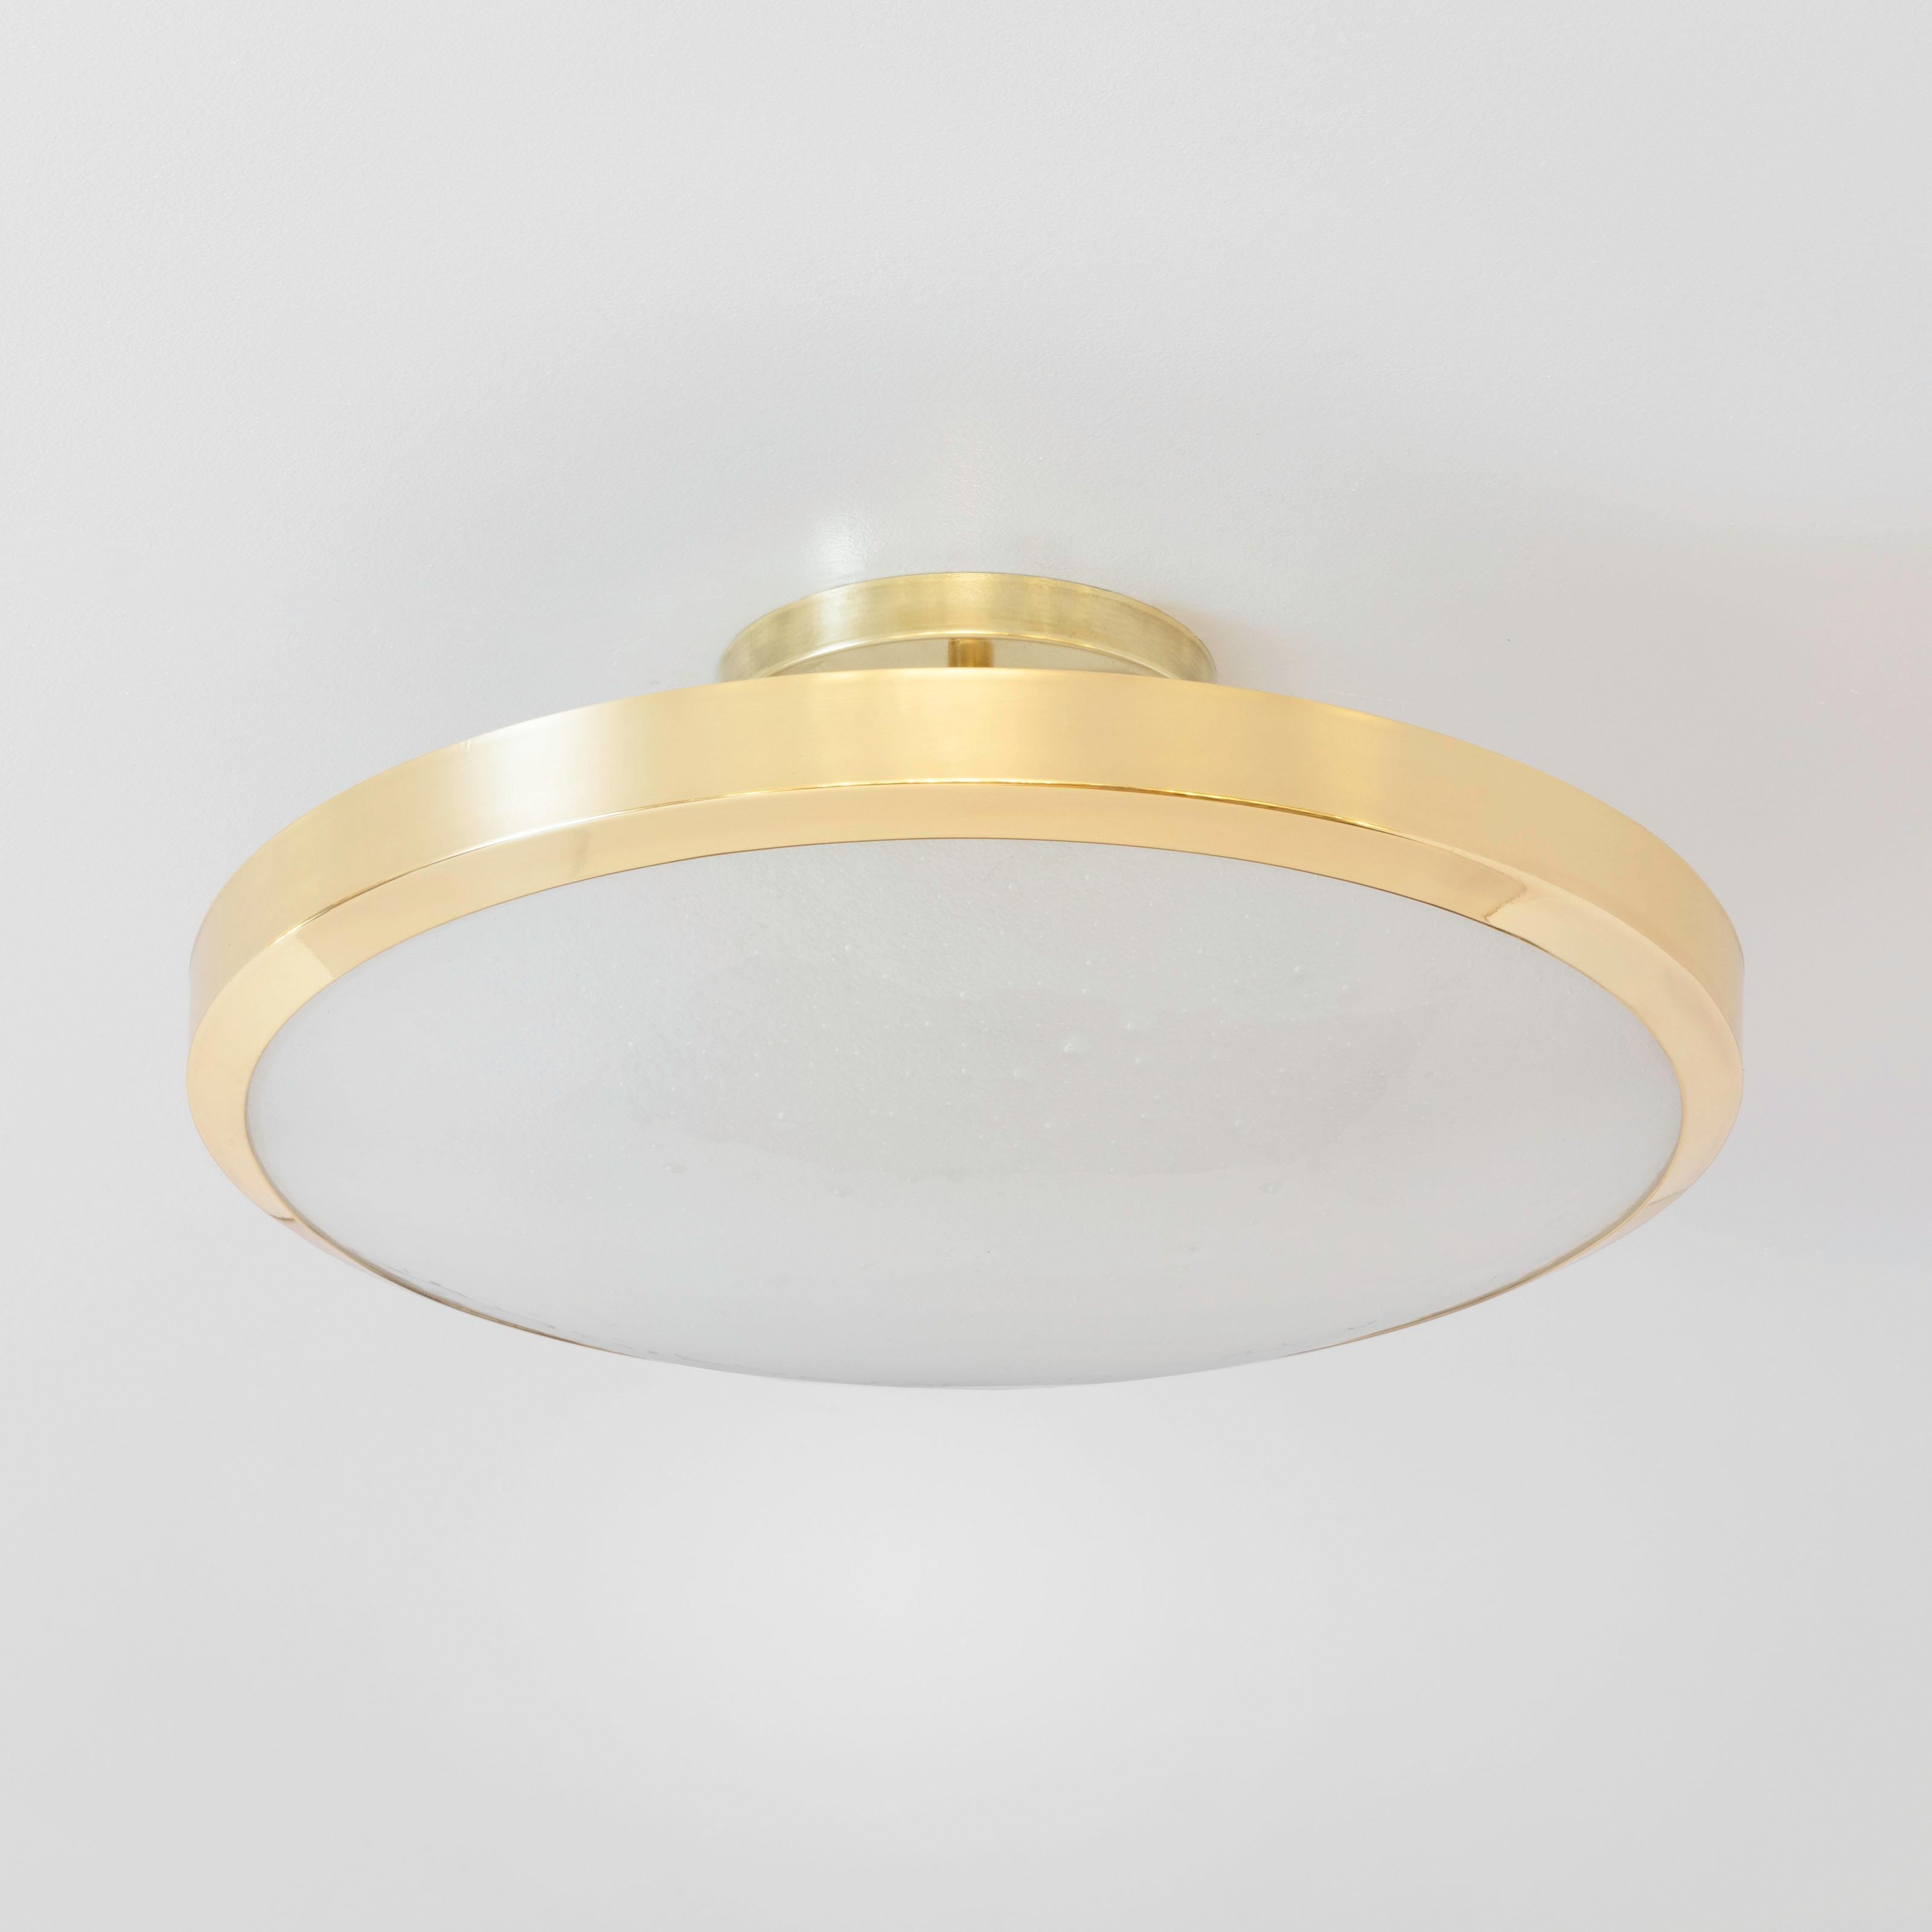 The Uno ceiling light exemplifies simple elegance via its clean profile designed around a single Murano glass shade. Shown in polished brass with our signature Murano bubble glass. Starting from $2,200.00 for the 10” diameter size.

Pricing by